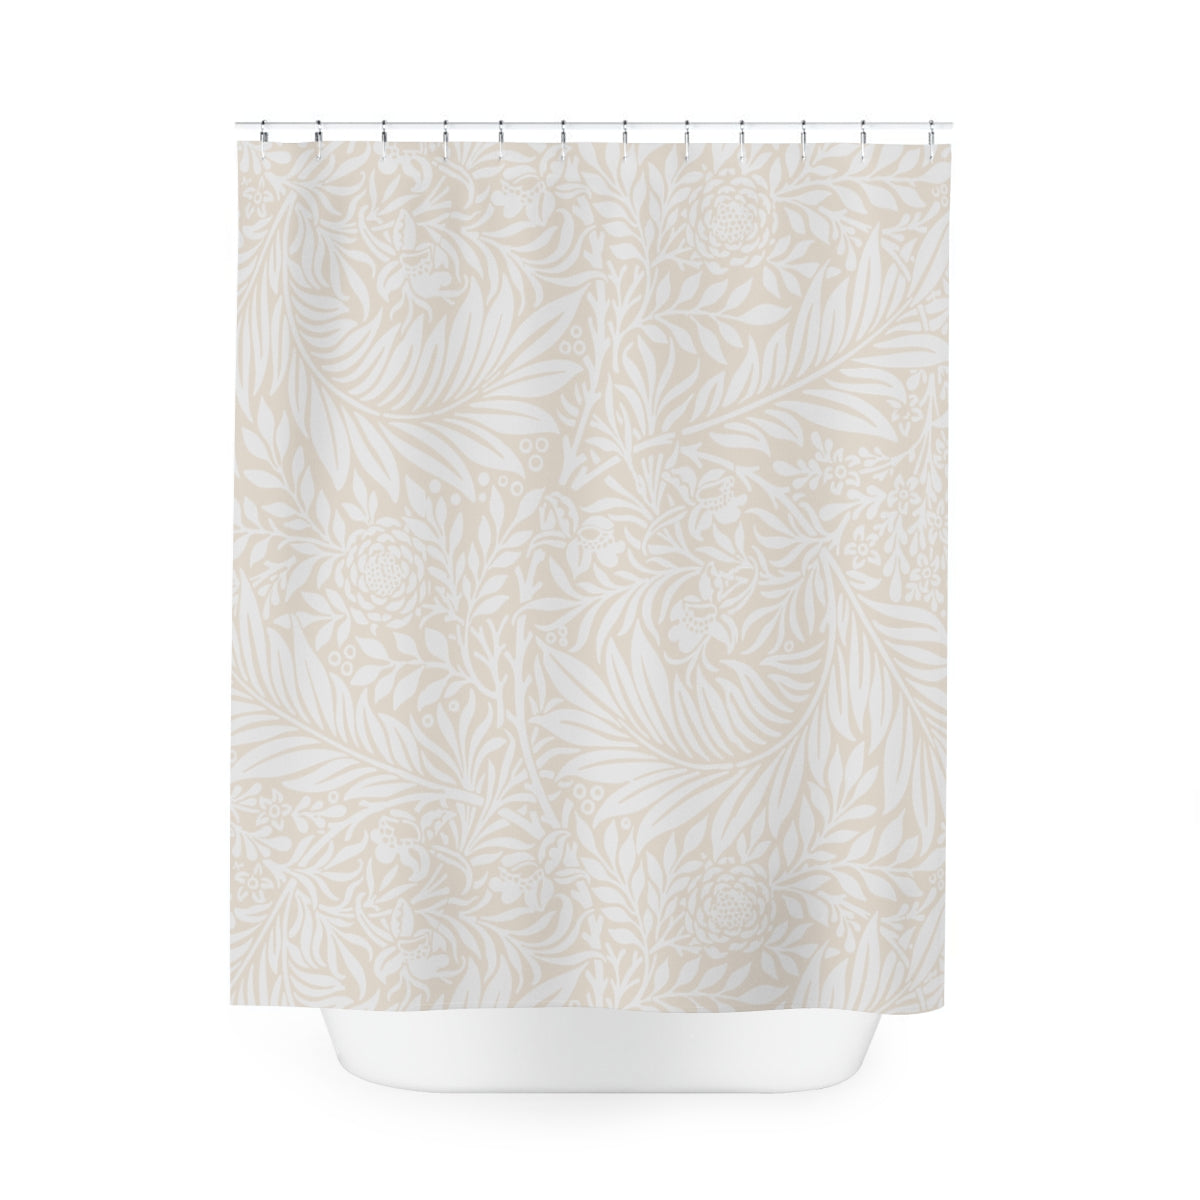 Floral Shower Curtain William Morris Inspired (5 colors)